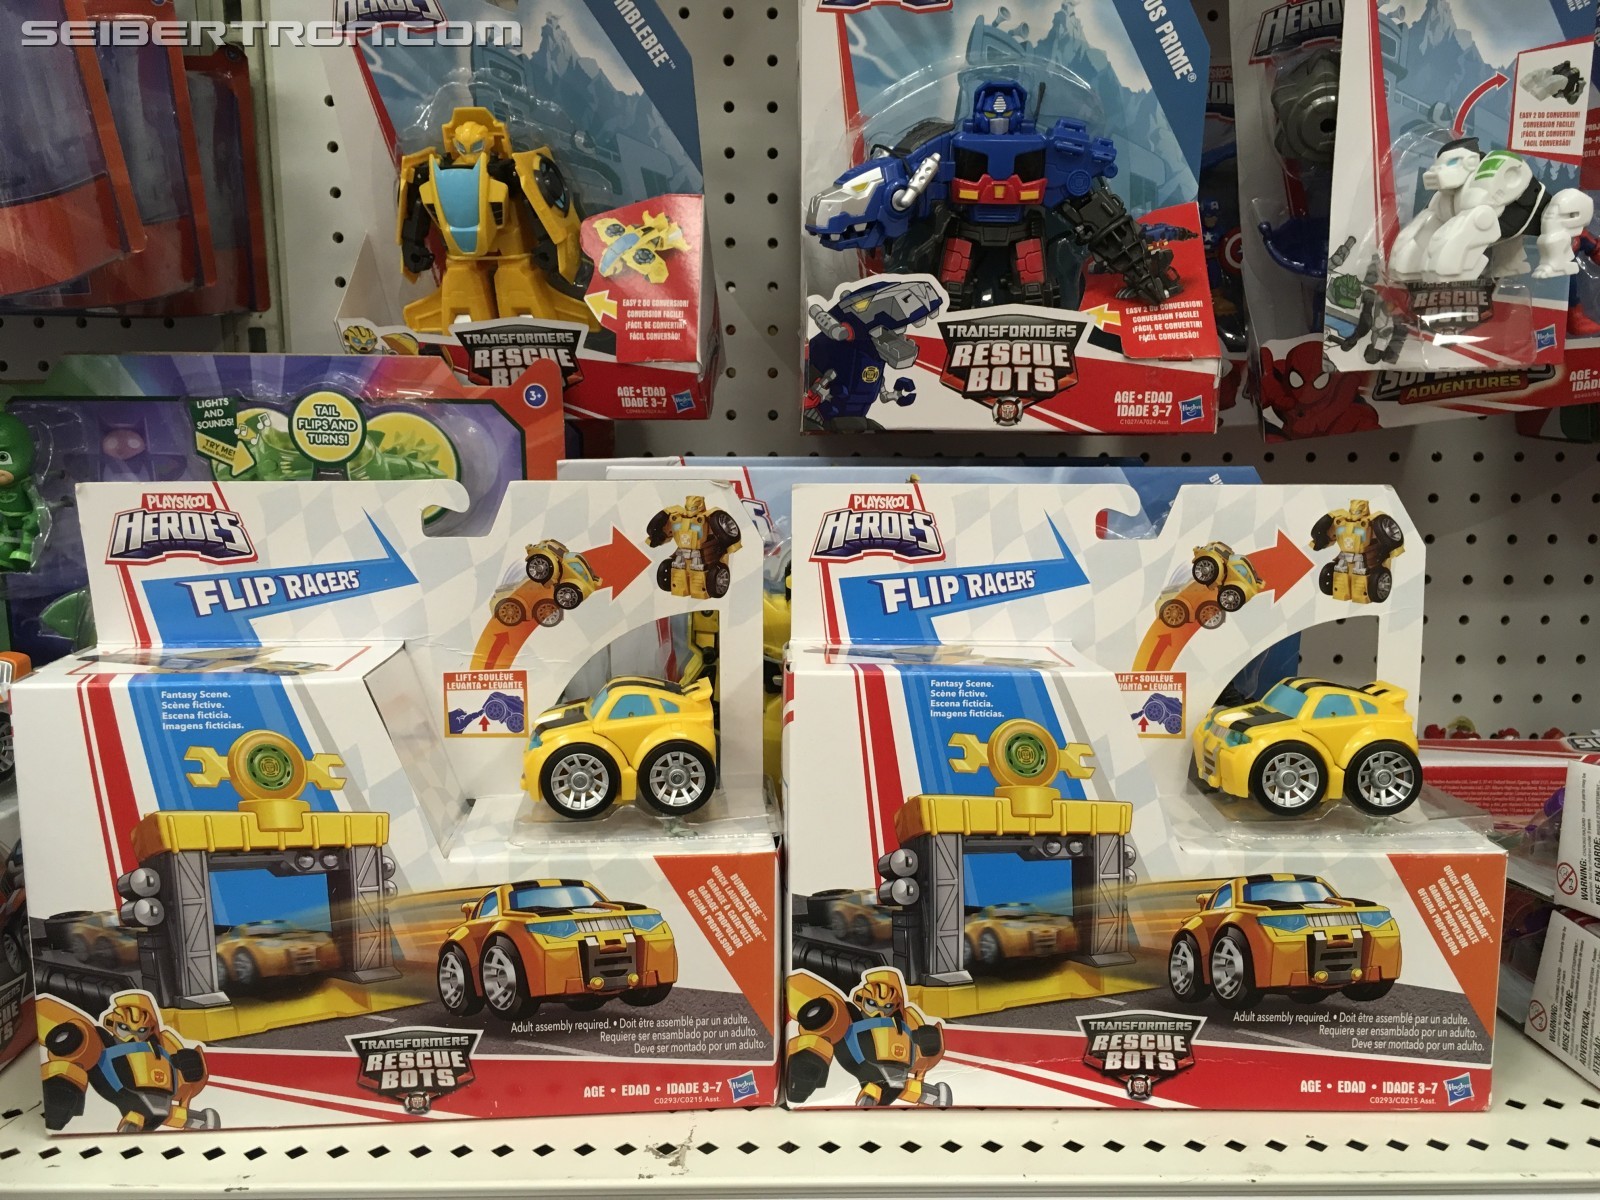 Transformers News: Transformers: Rescue Bots Flip Racer Bumblebee Quick Launch Garage Sighted at US Retail